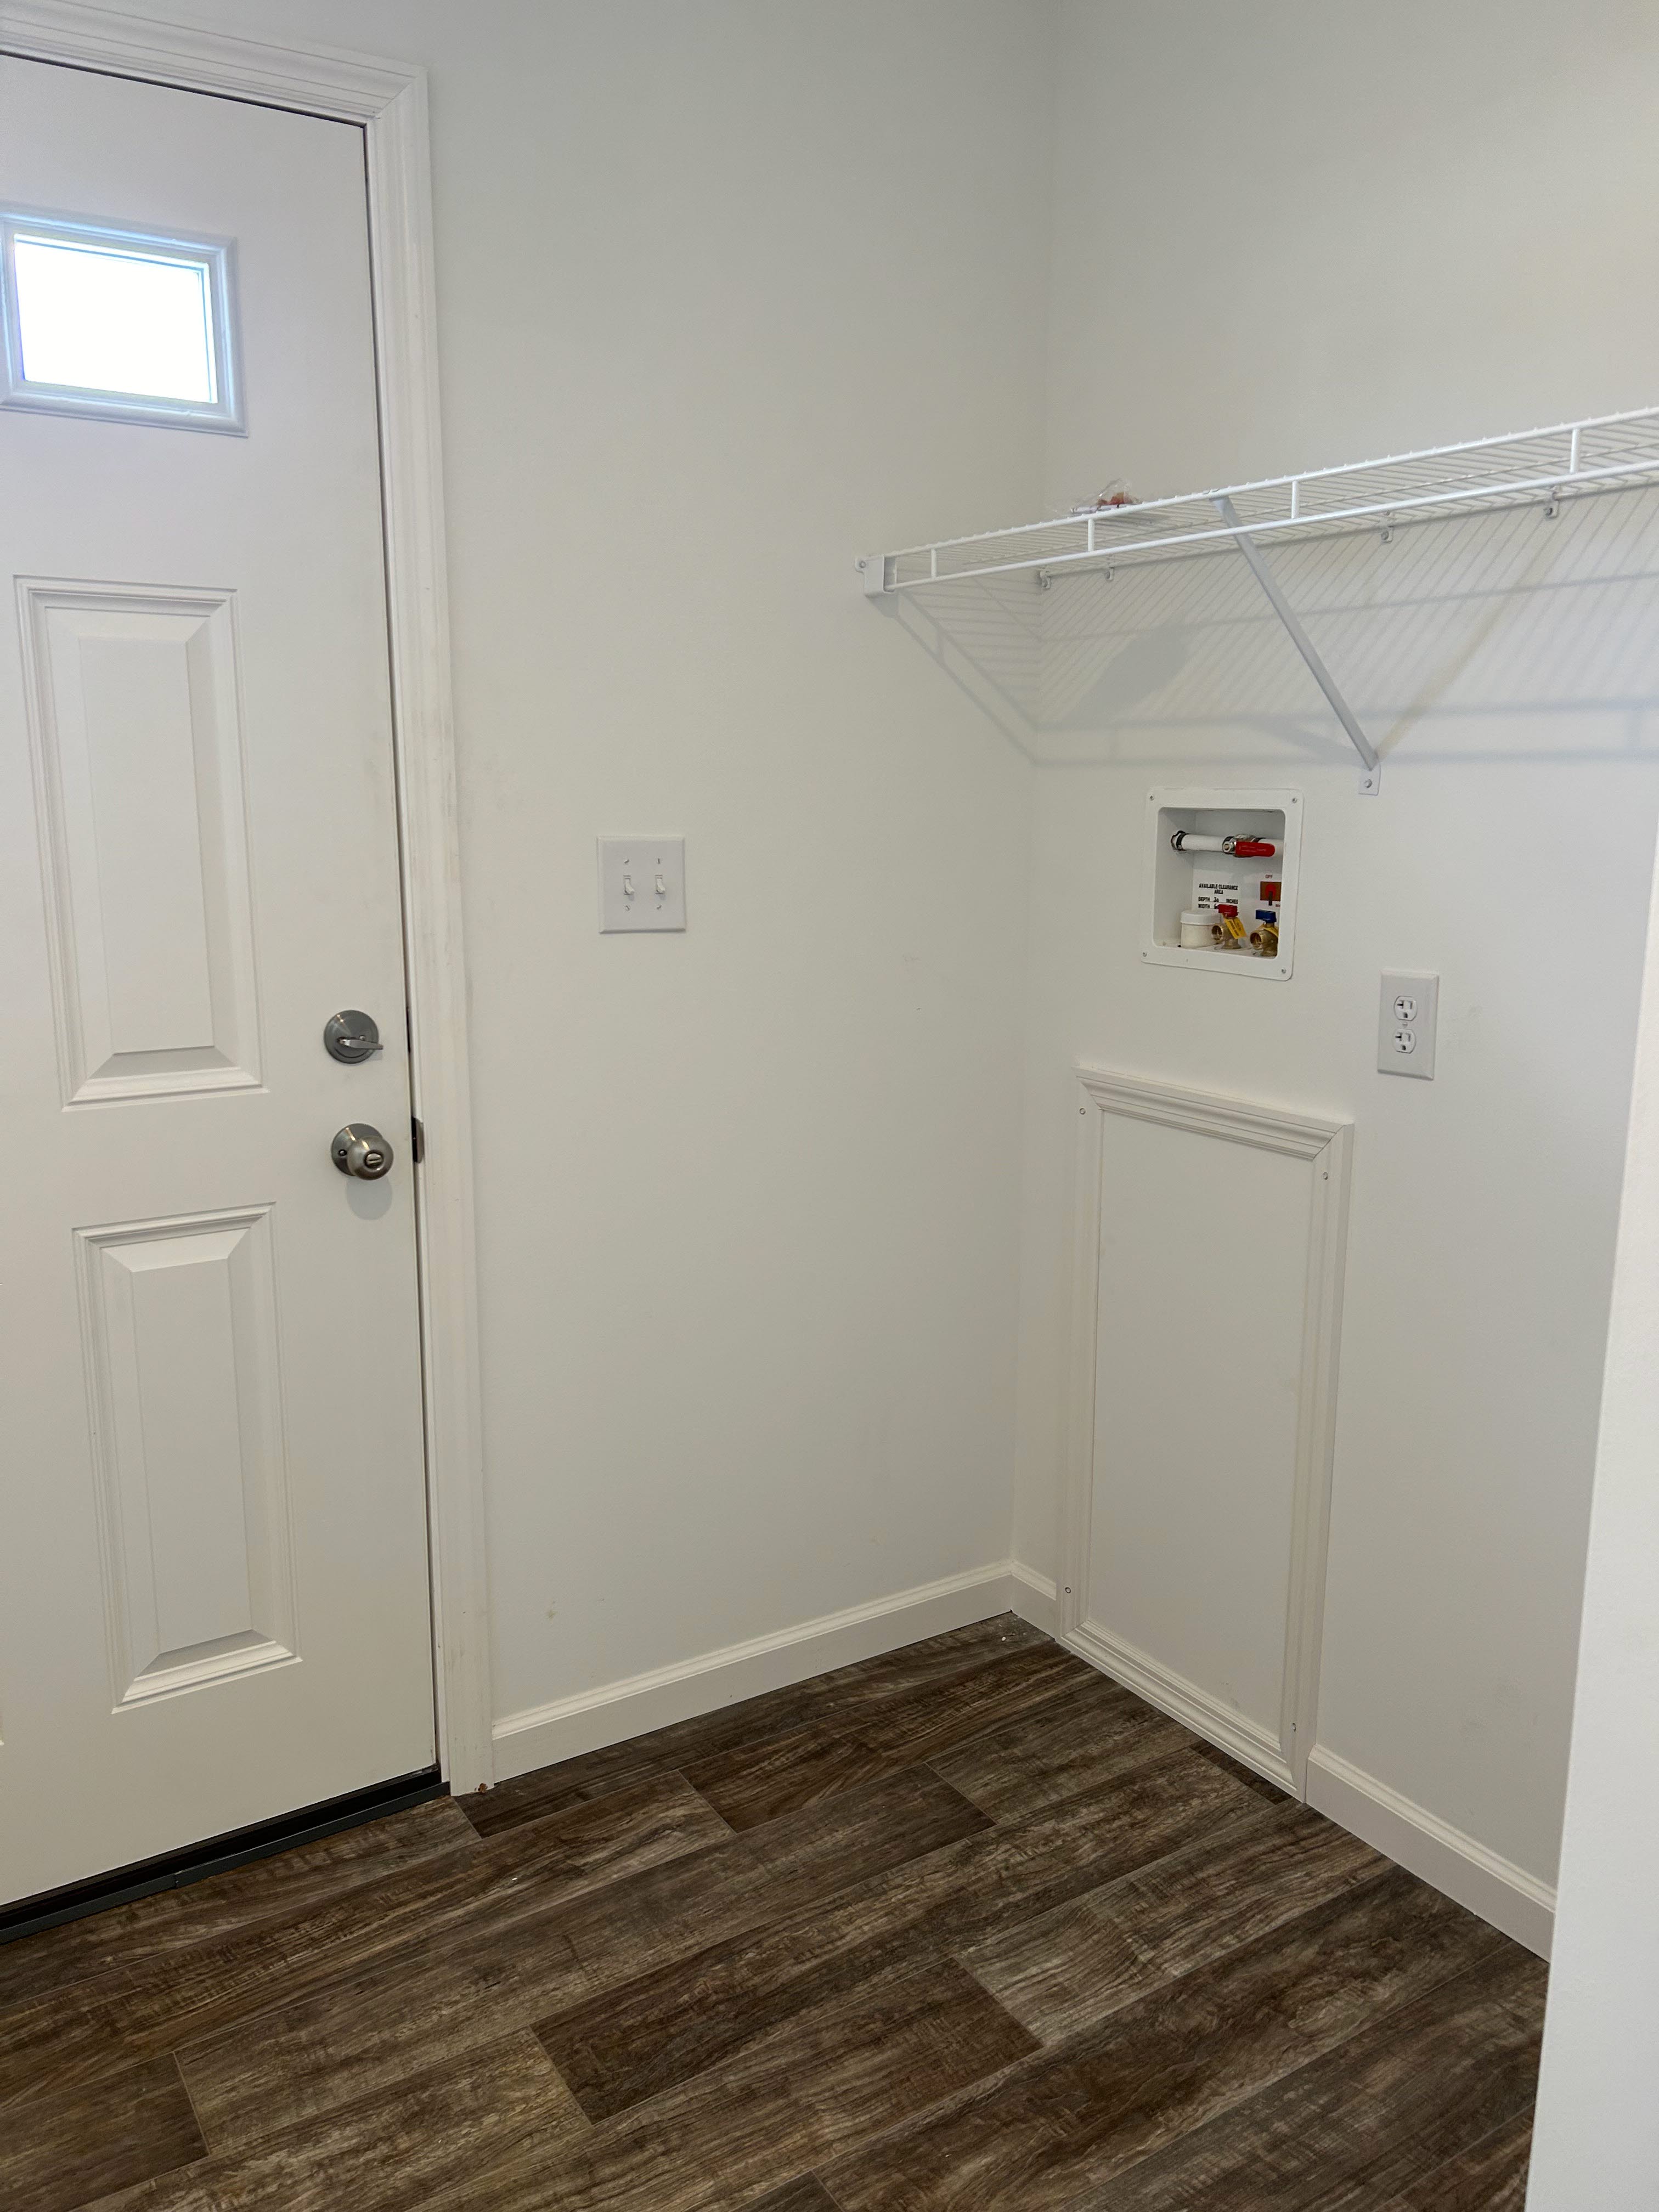 Washer Dryer area